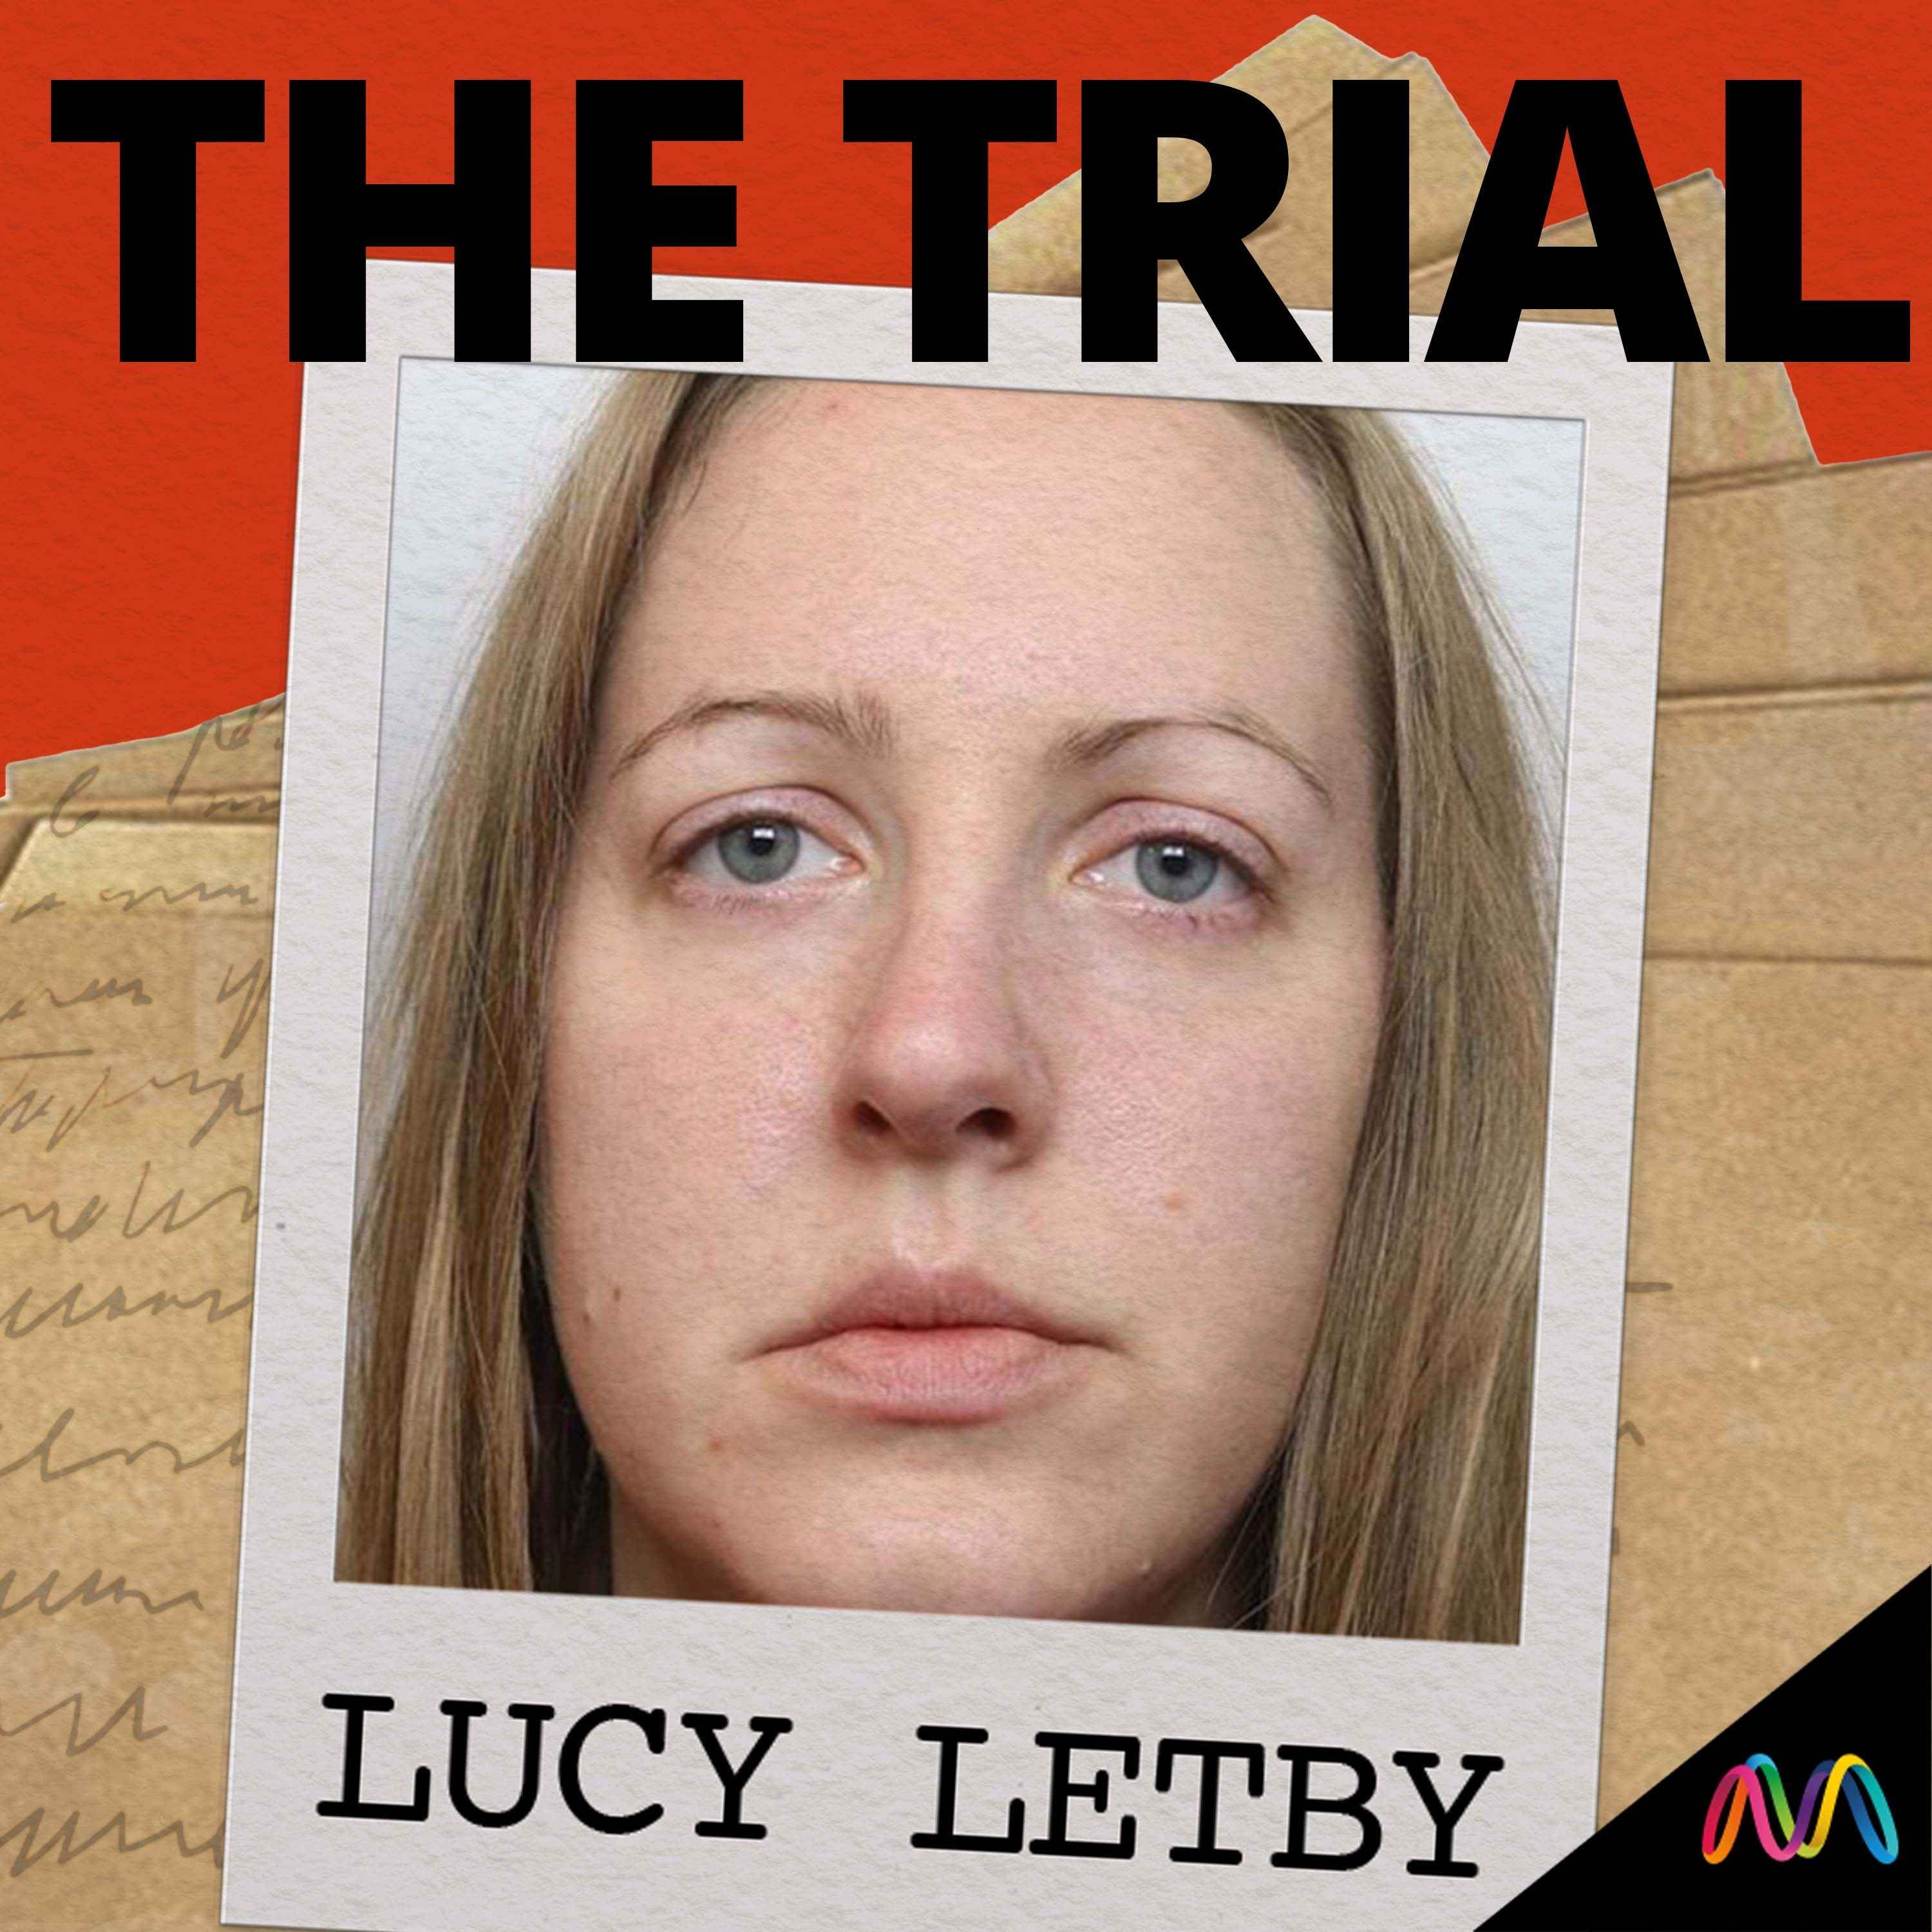 Lucy Letby: Baby I: “Our daughter could go from perfectly fine to nearly dying in seconds.